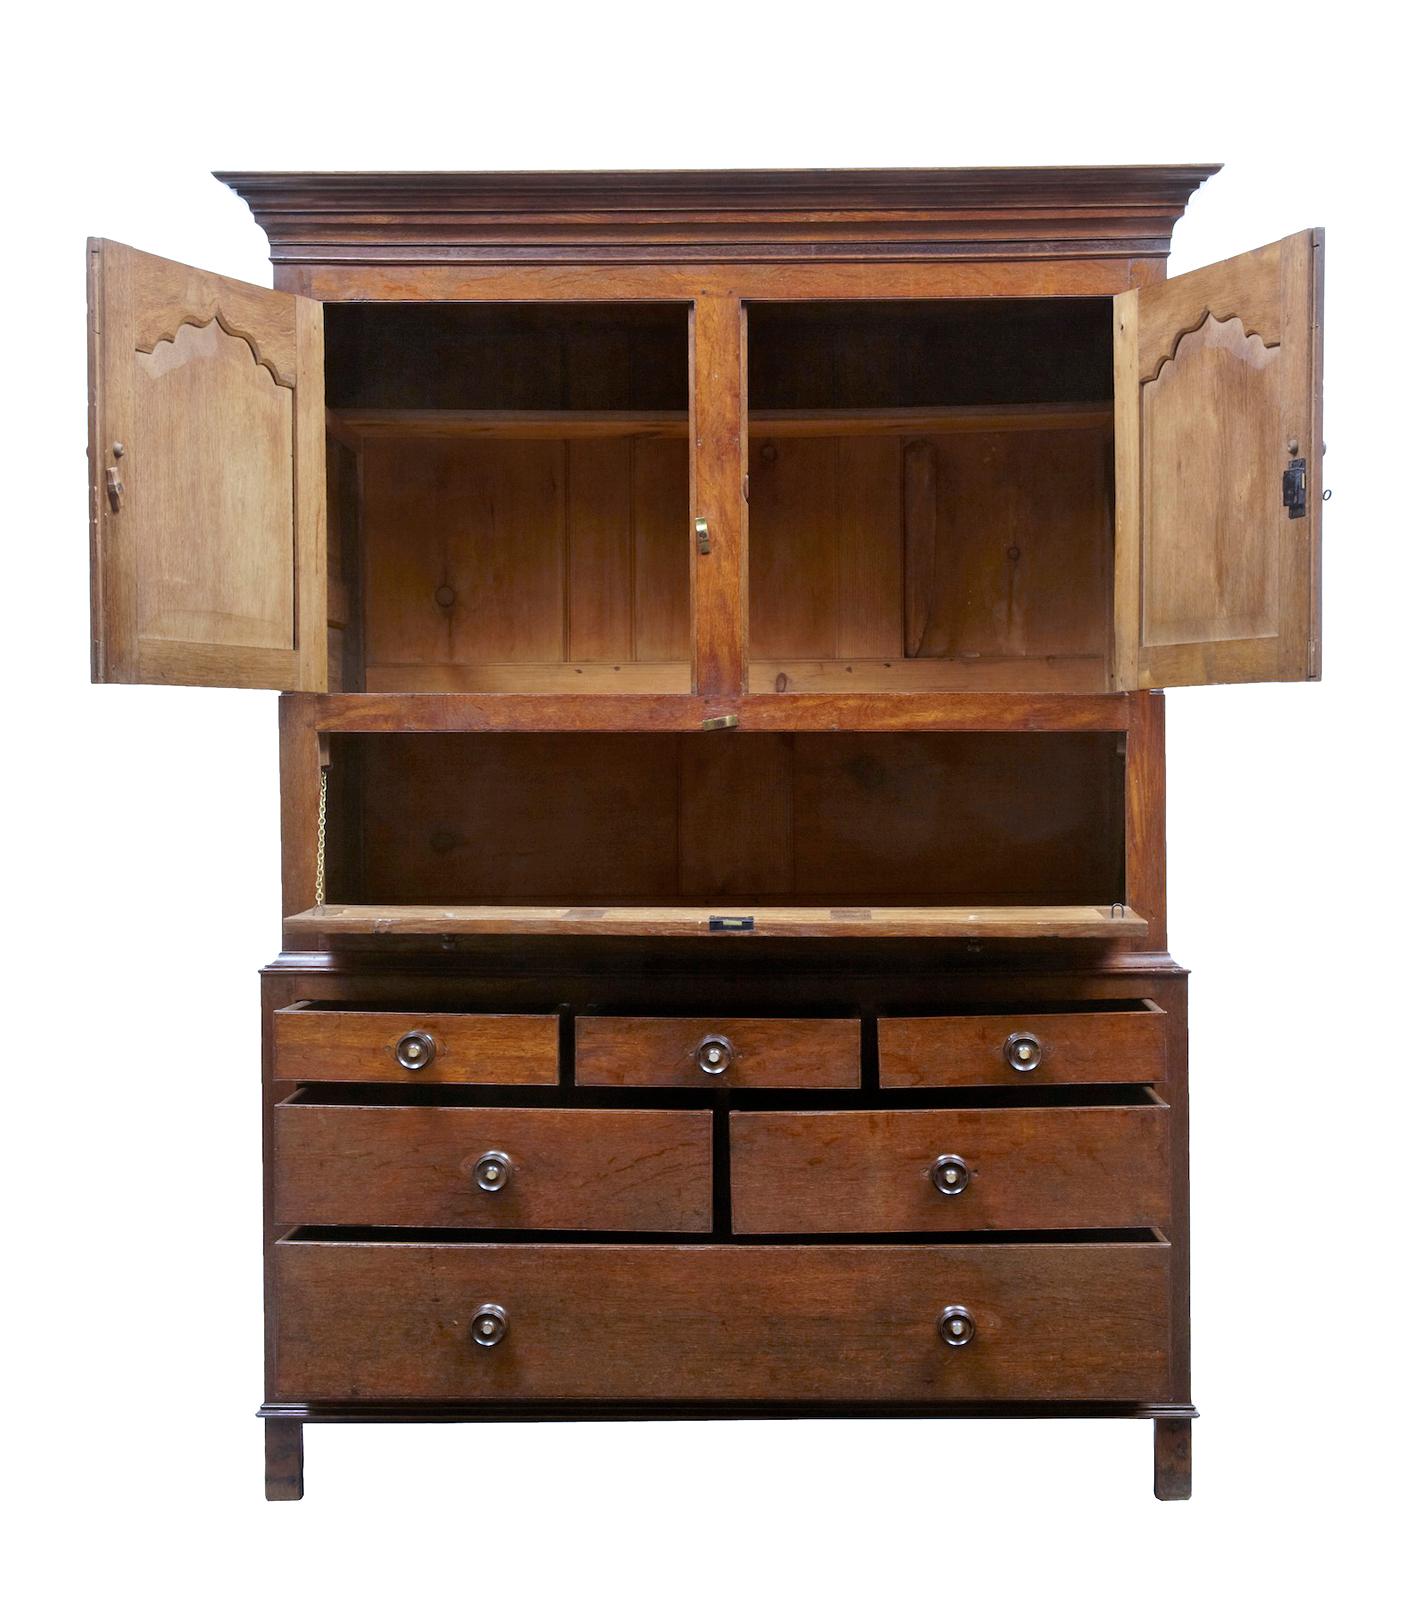 Good quality oak cupboard. Splits in two parts, top section comprising of double oak doors which open out to reveal small shelf, underneath a drop down hatch door with further cupboard space. Bottom section consists of three short drawers over two